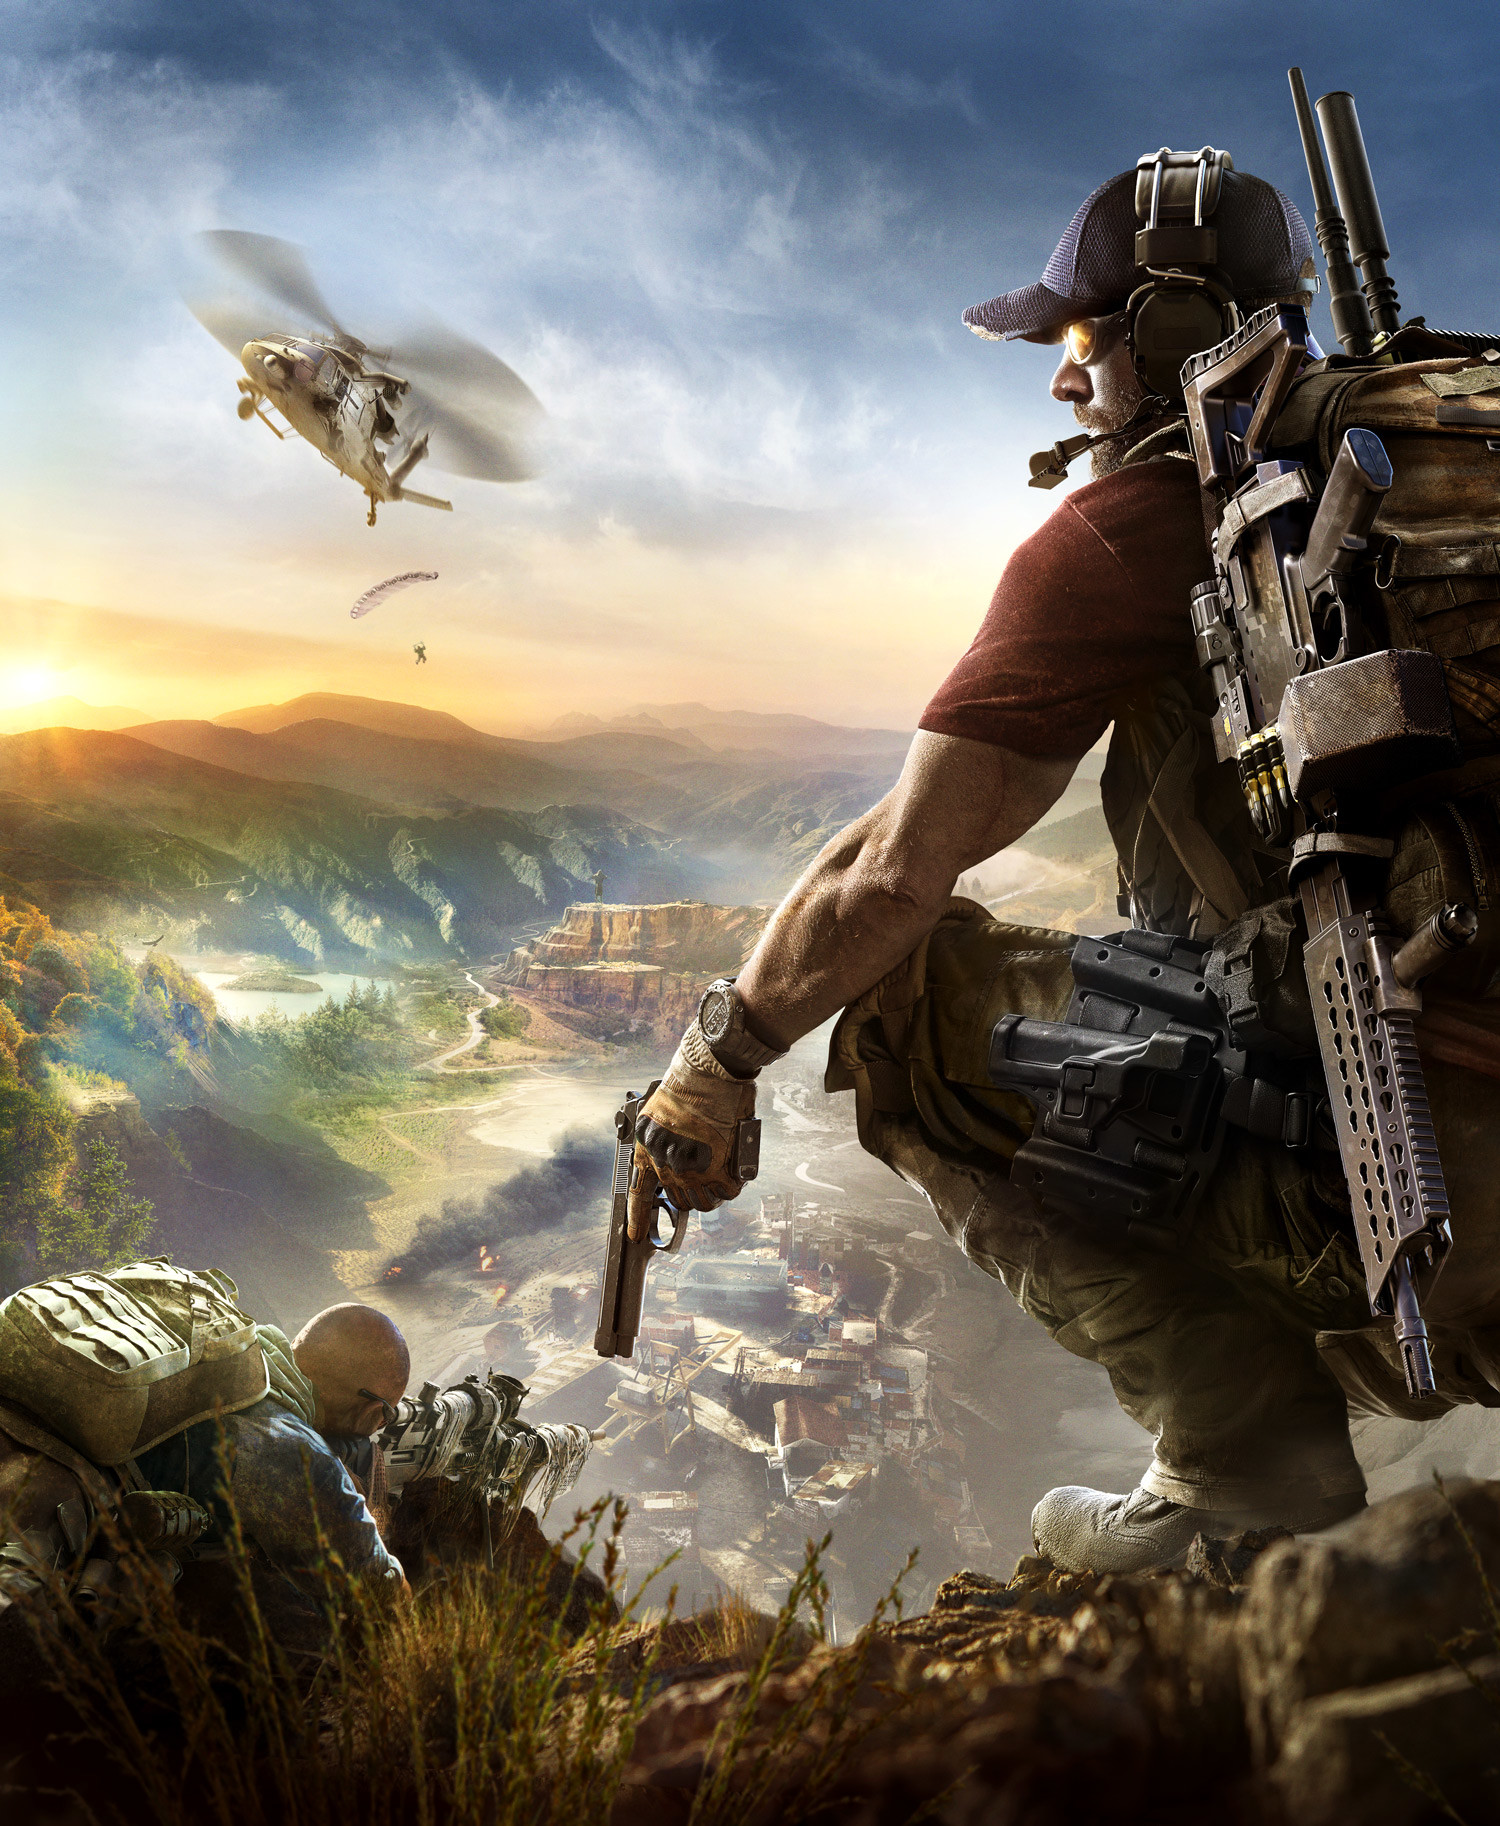 ghost recon wildlands wallpaper,action adventure game,cg artwork,pc game,strategy video game,digital compositing